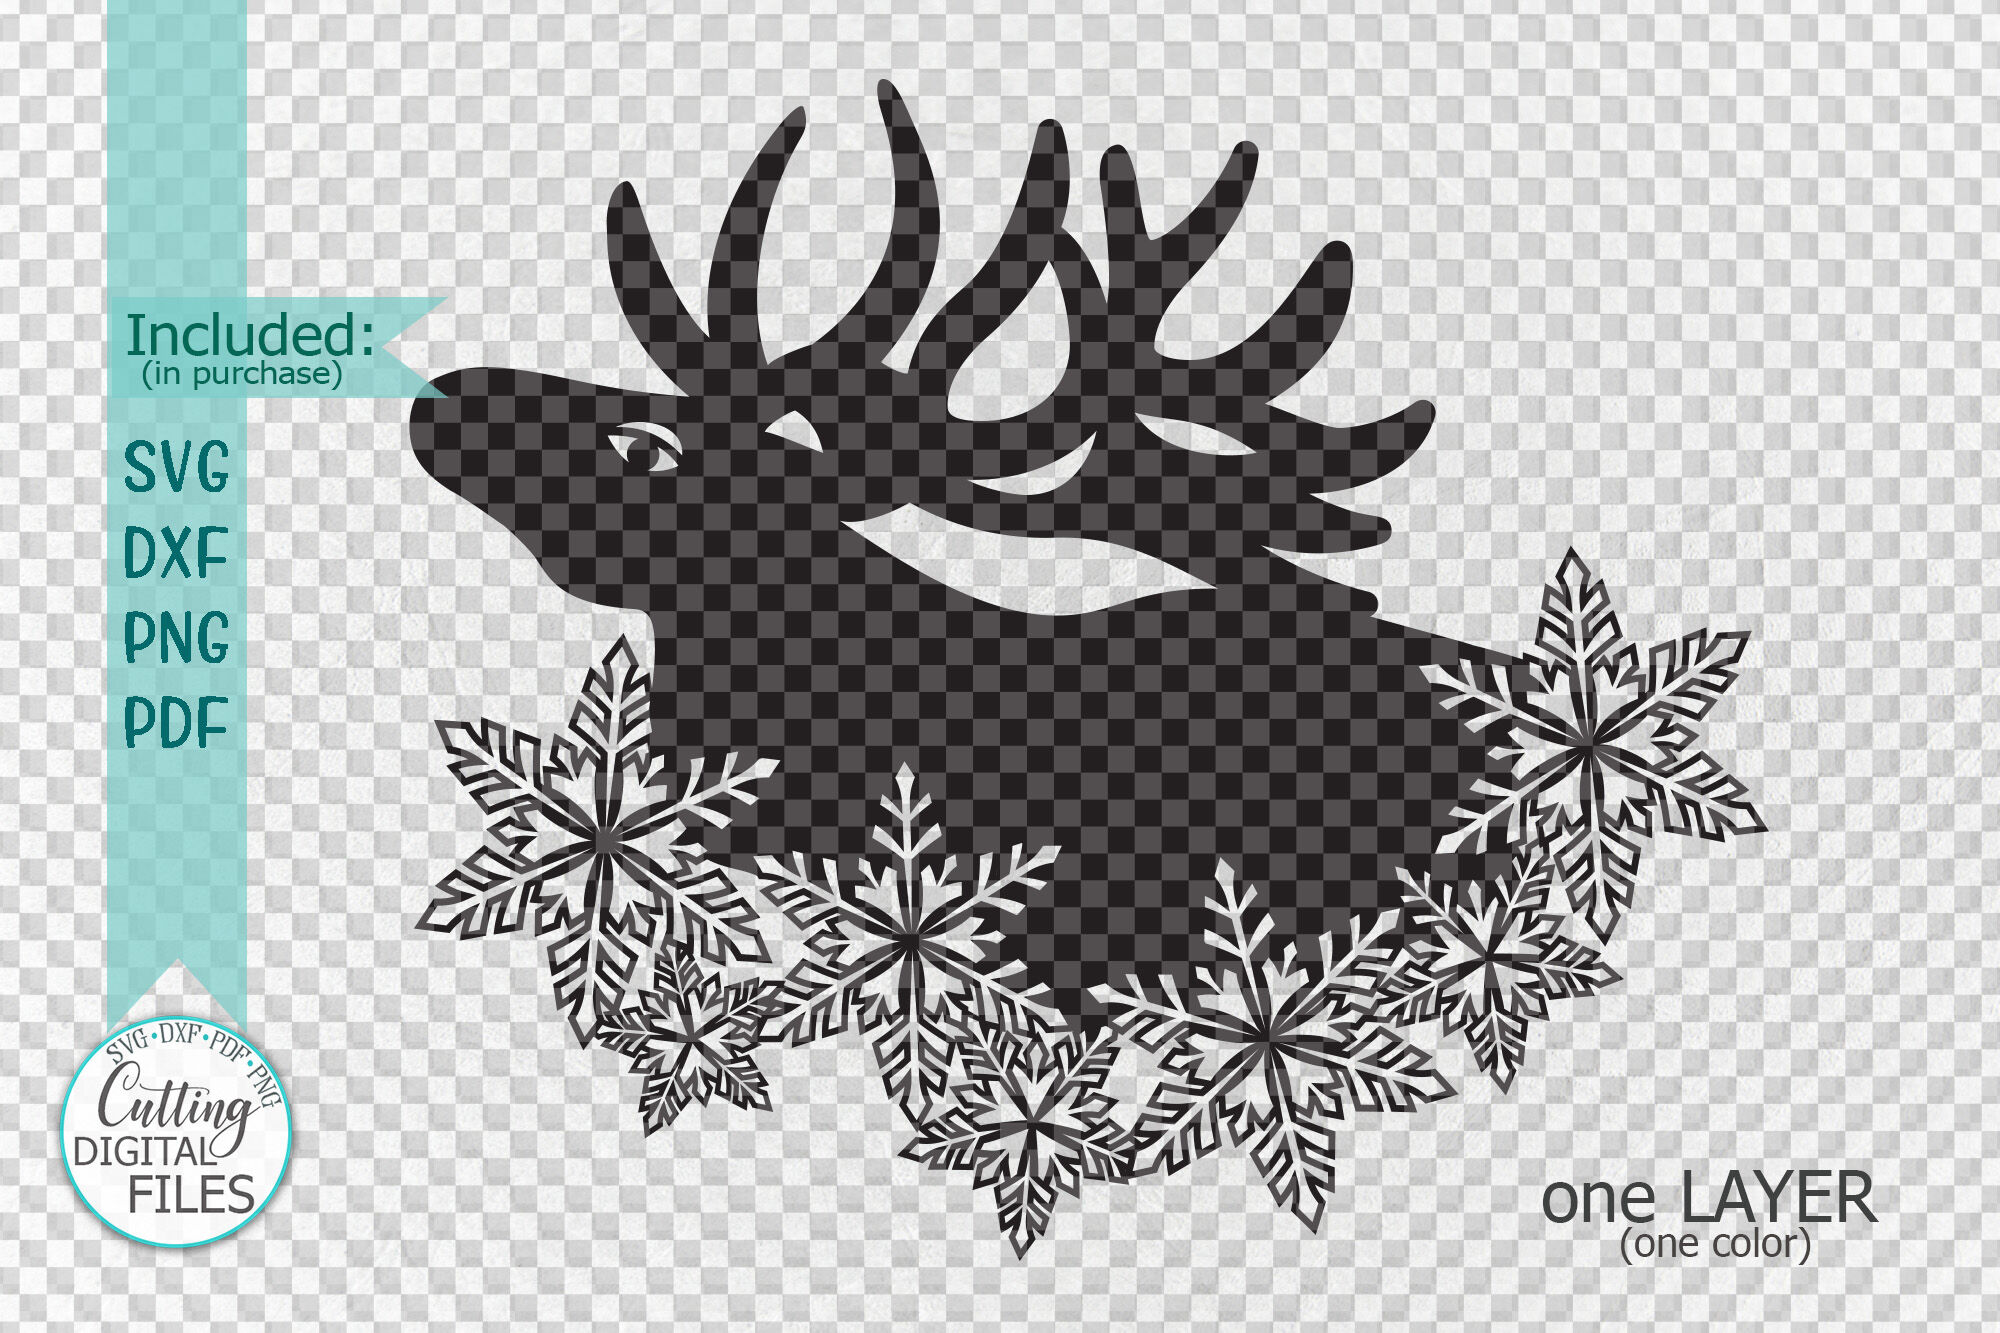 Christmas Moose with Snowflakes svg cut out template By kArtCreation